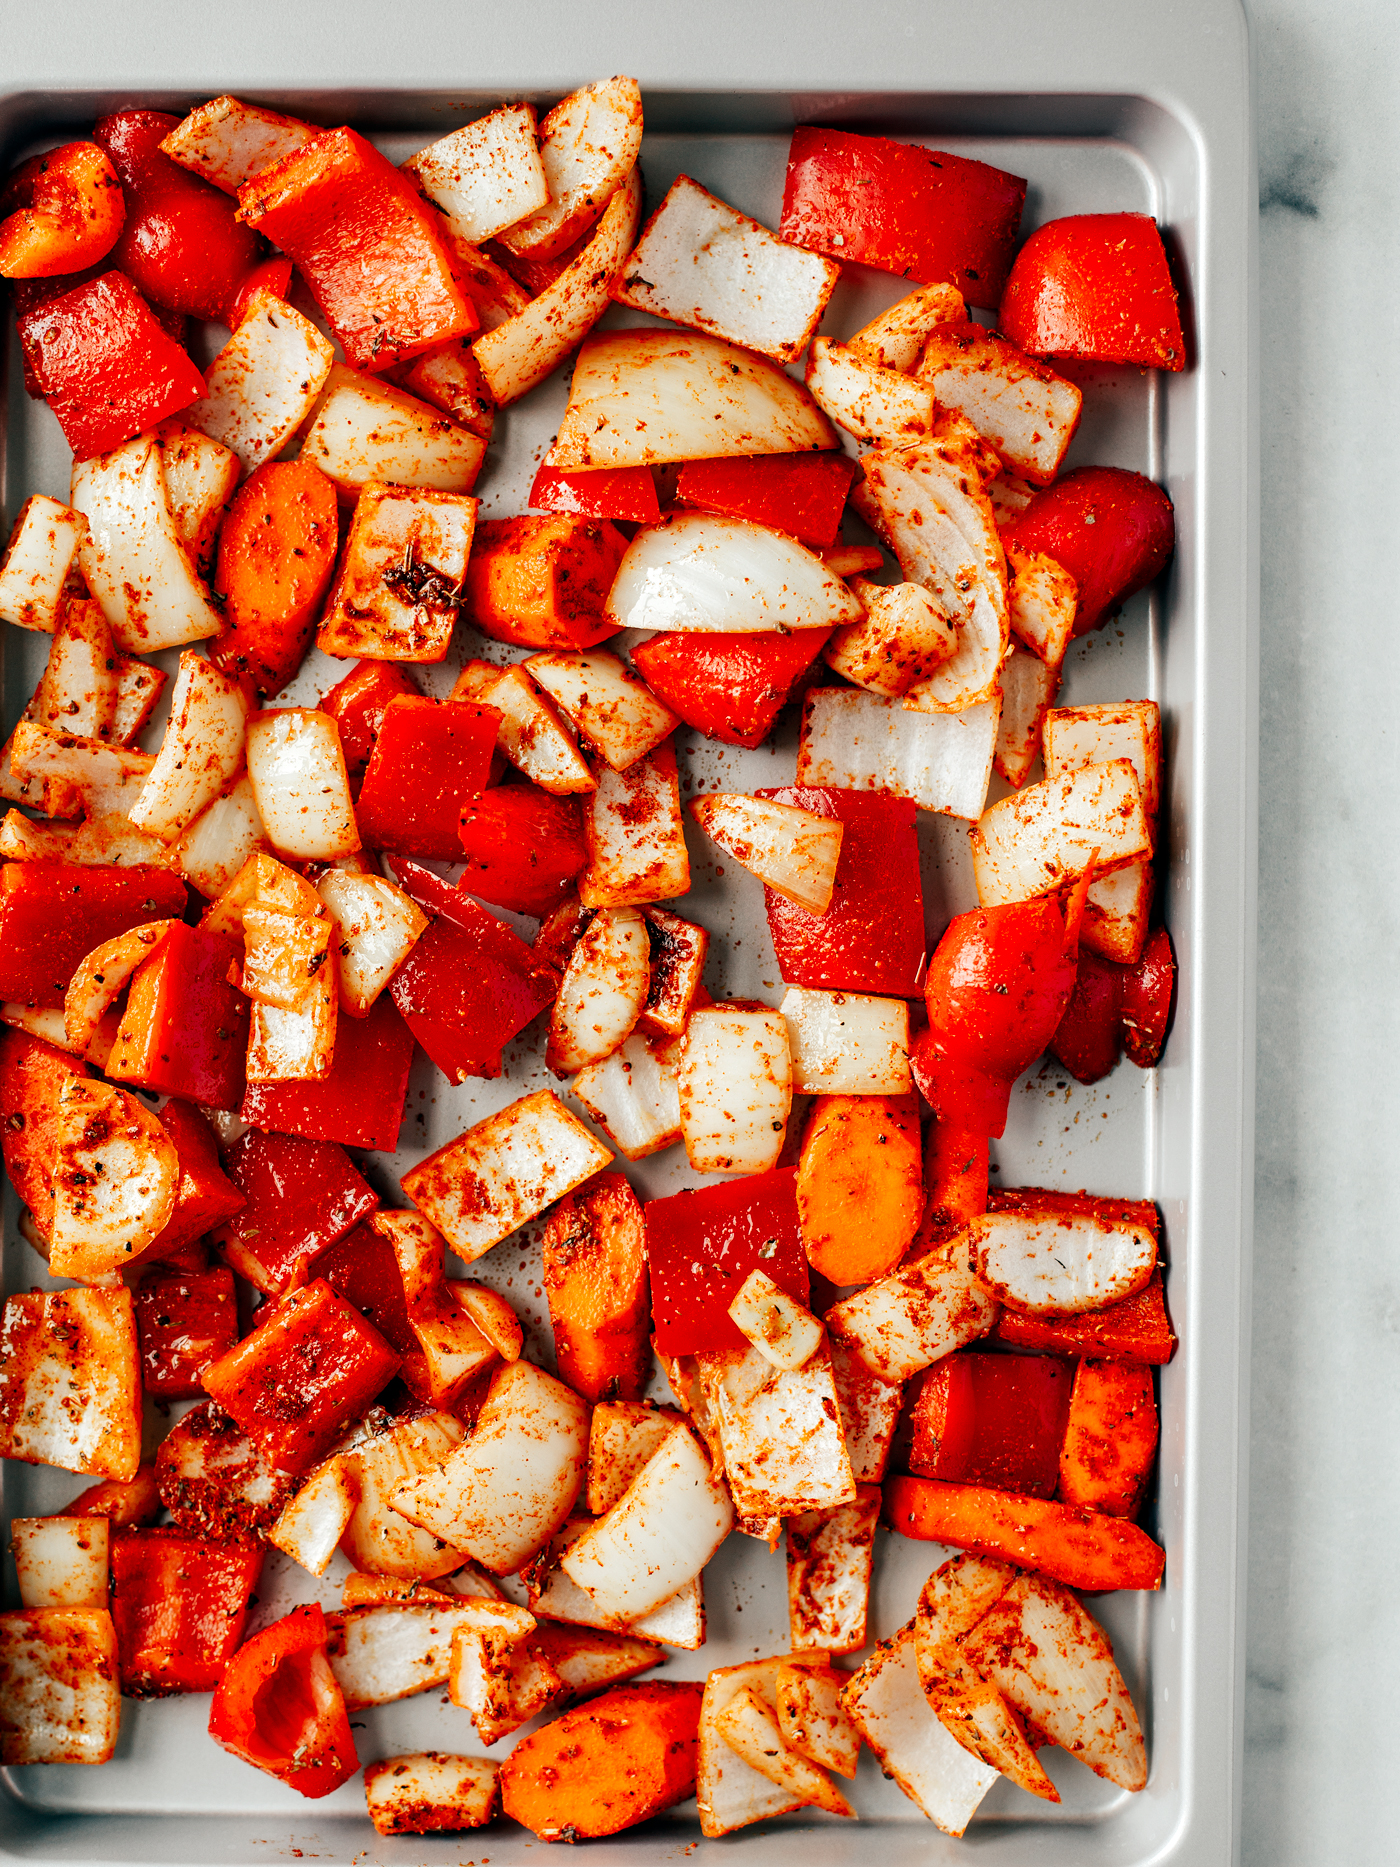 Sheet pan topped with full of chopped and seasoned peppers, onions, and carrots.